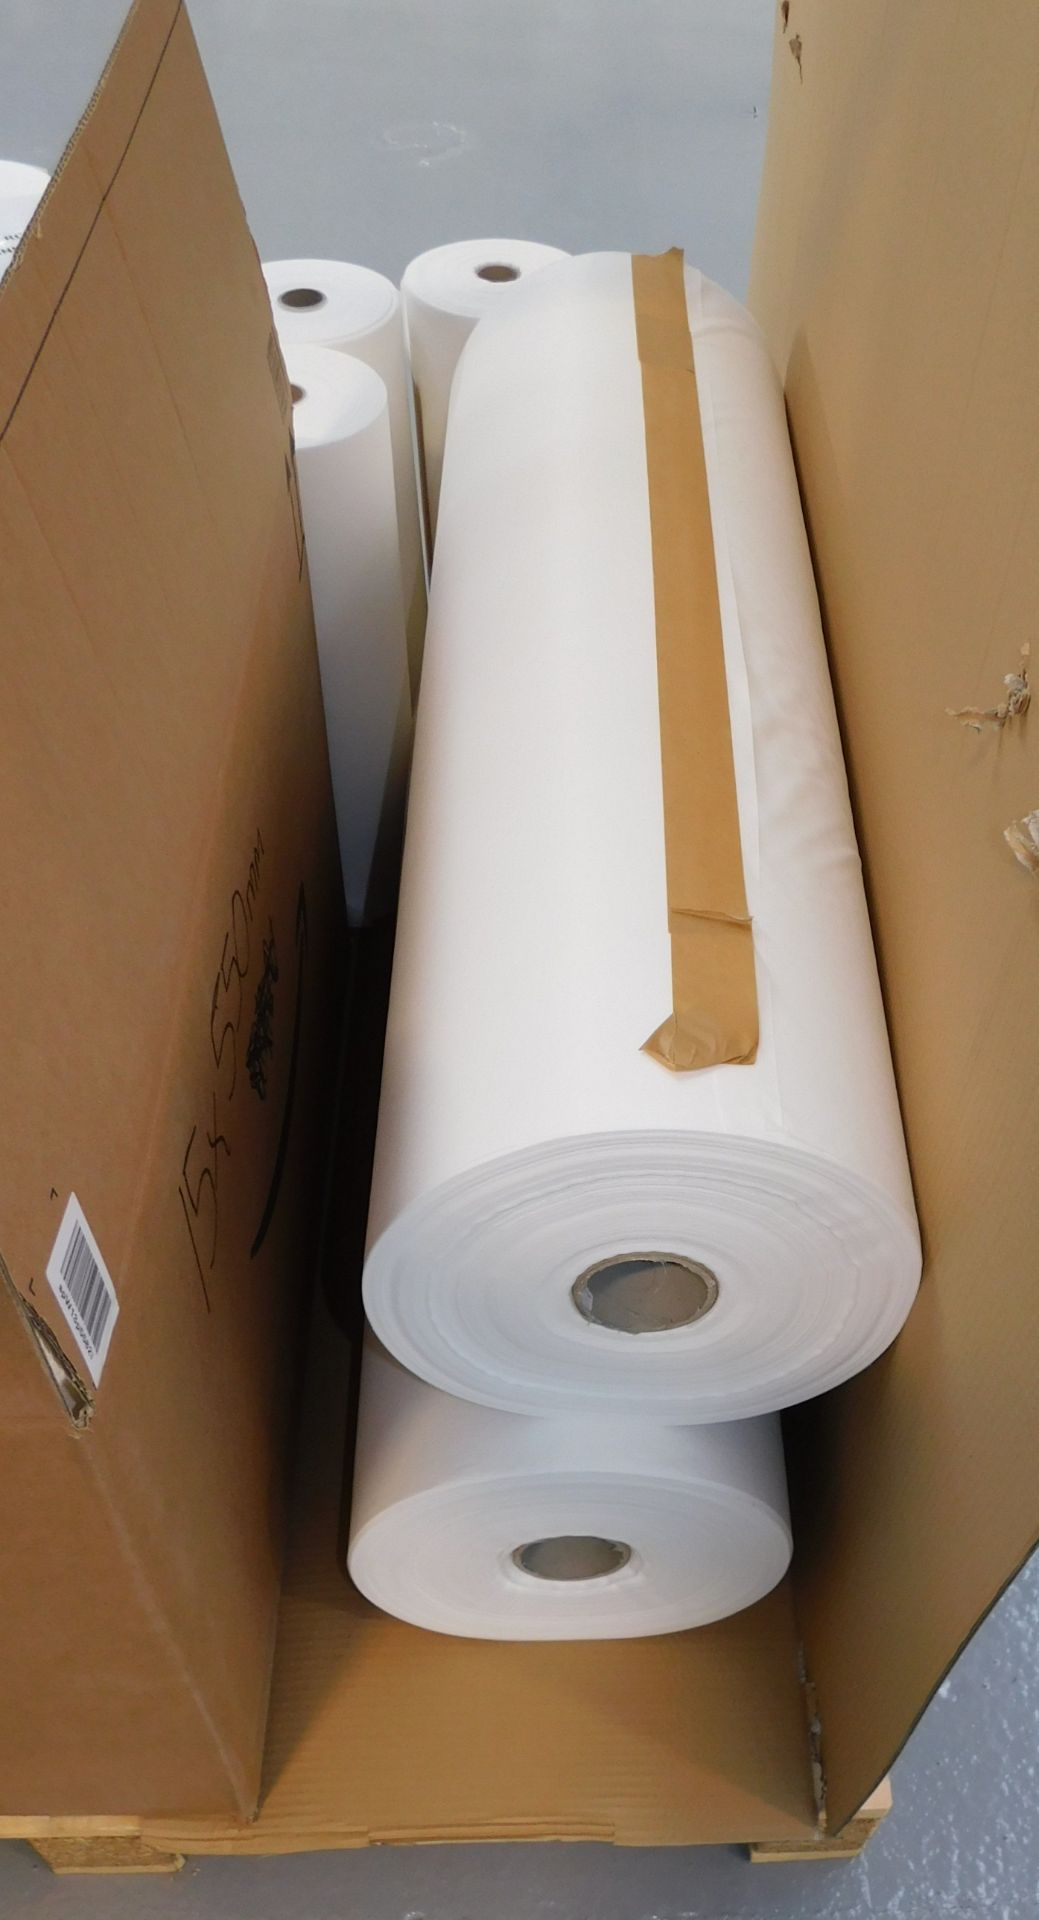 Contents of Stillage to include Viscose Fabric (Nylon Nanodot) Rolls, Cut to Fit Electrospinning - Image 2 of 4